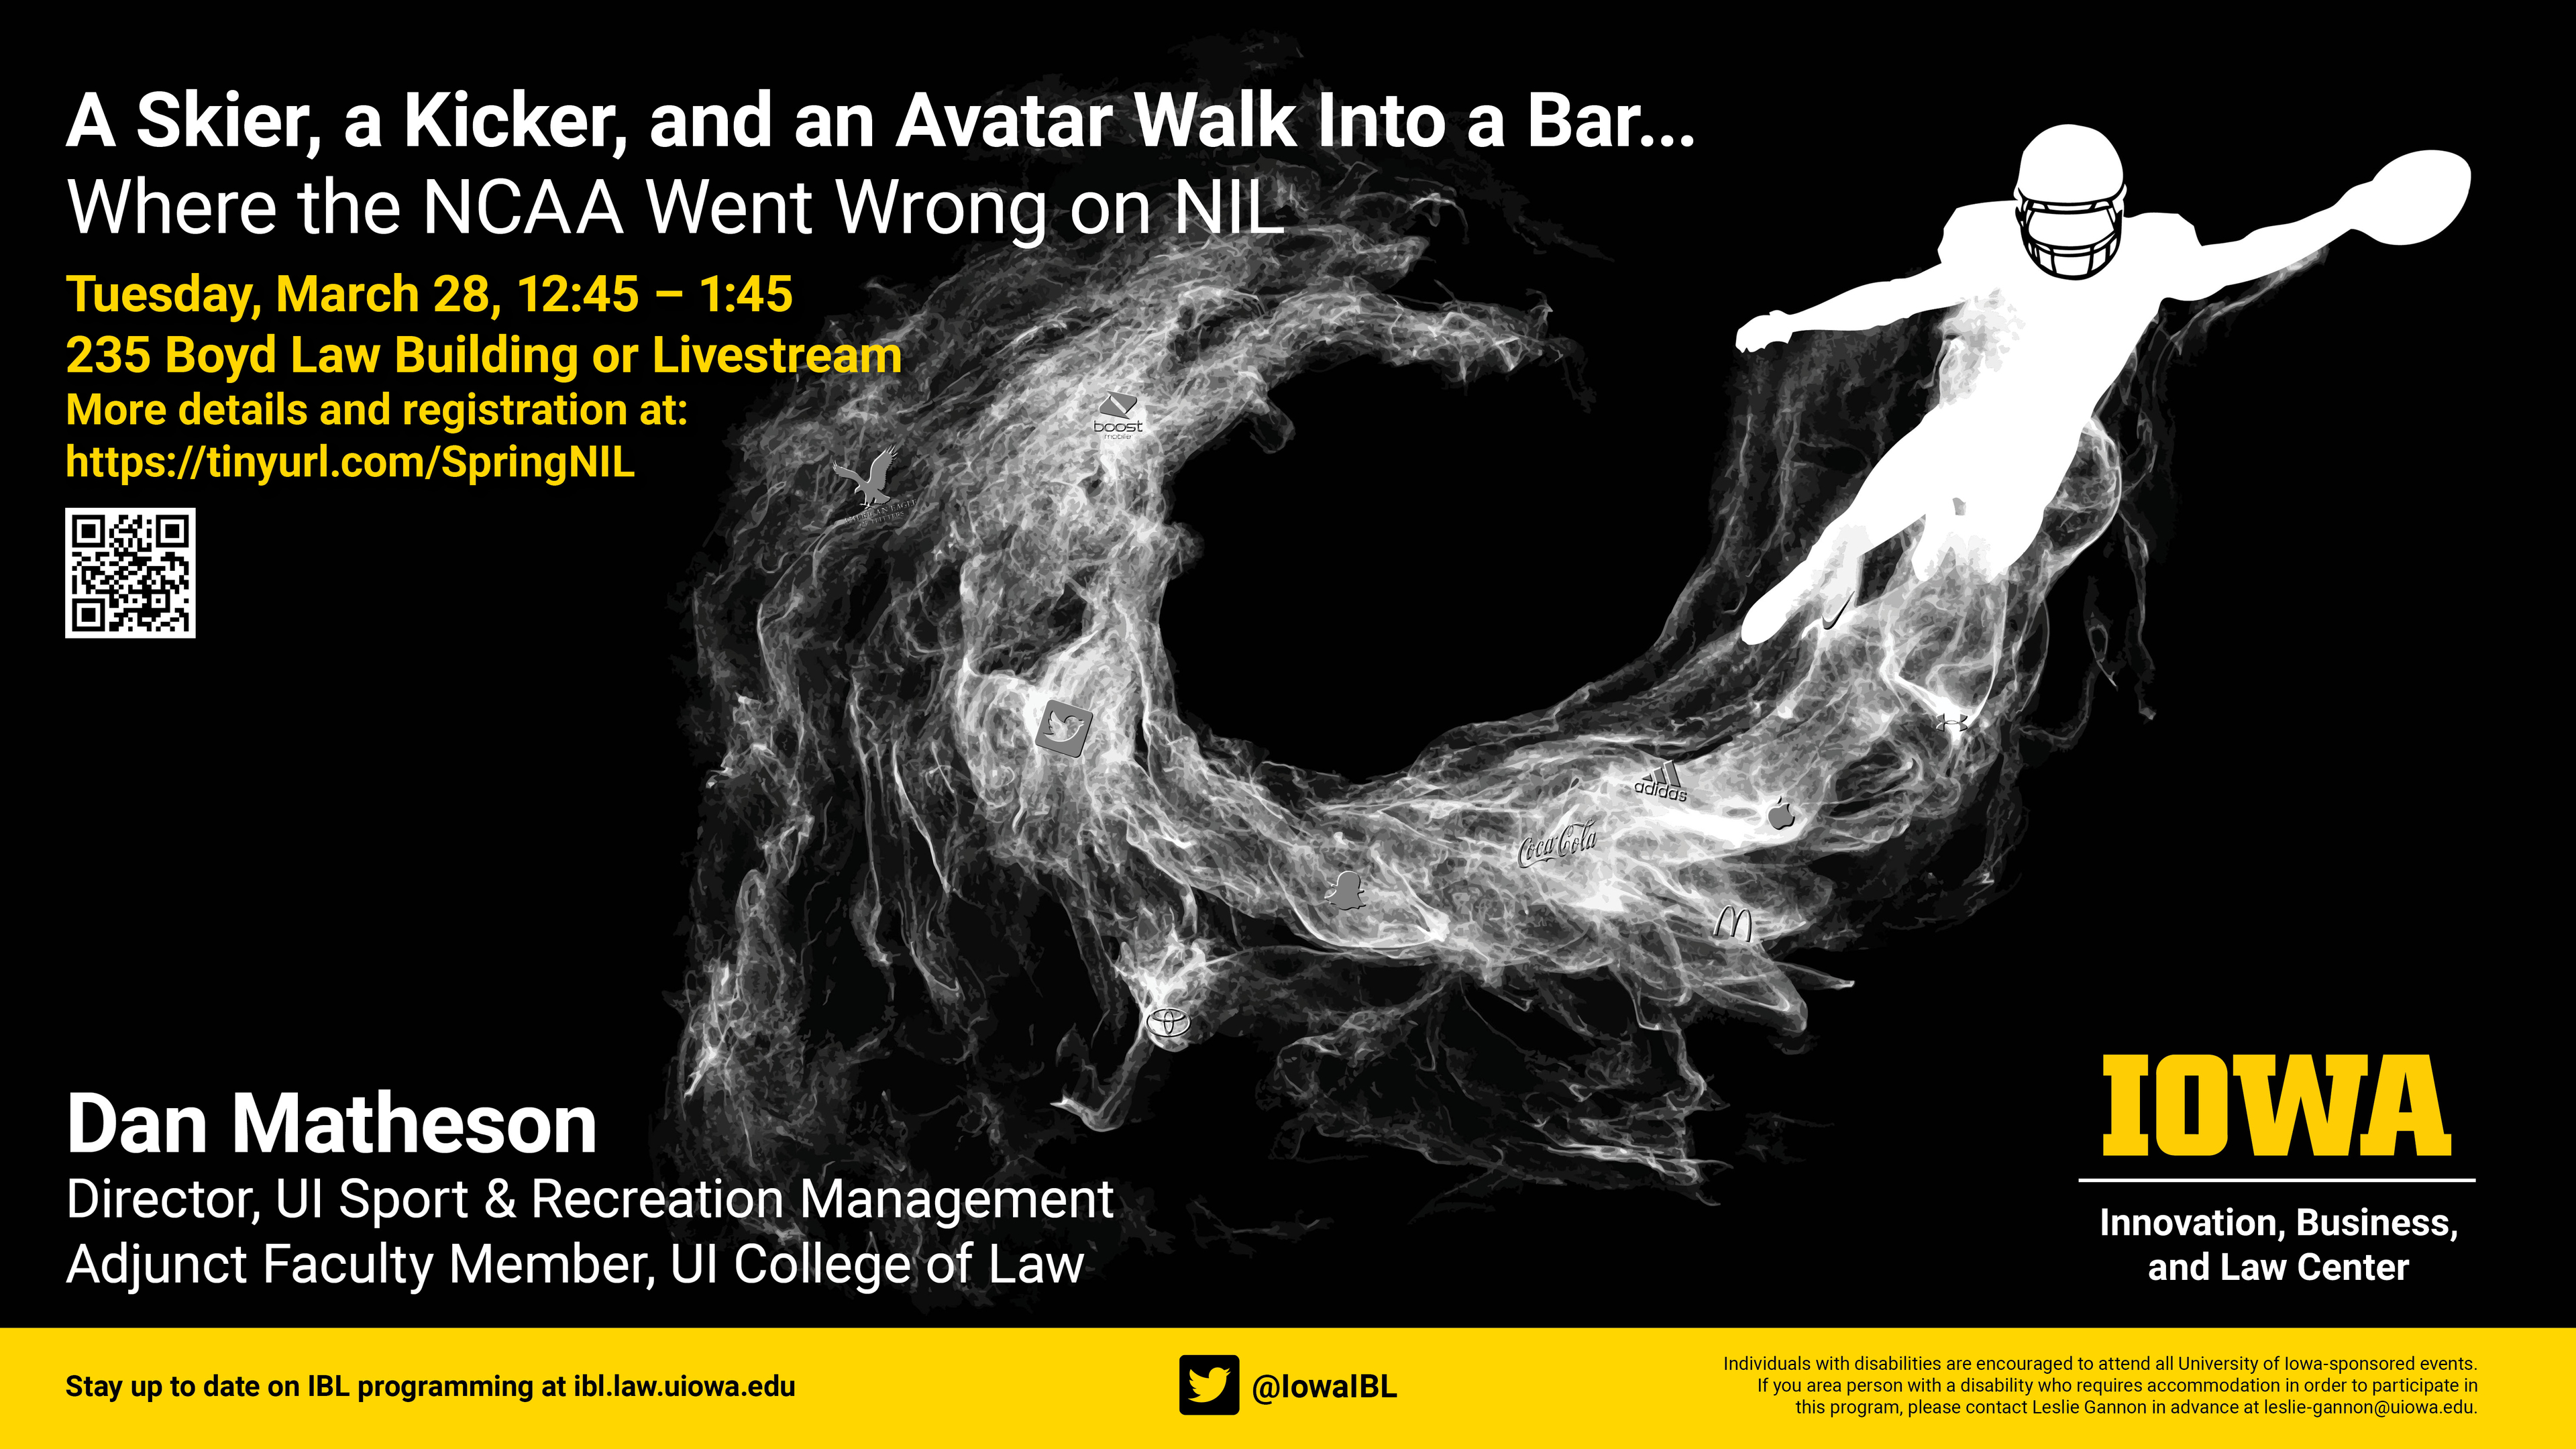 A skier, a kicker, and an avatar walk into a bar - where the NCAA went wrong on NIL. Tuesday, March 28, 12:45 - 1:45 at 235 Boyd Law Building or Live stream. More details and registration at: https://tinyurl.com/SpringNIL        Dan Matheson, director of UI Sport & Recreation Management, Adjunct Faculty Member, UI College of Law        Stay up to date on IBL programming at ibl.law.uiowa.edu